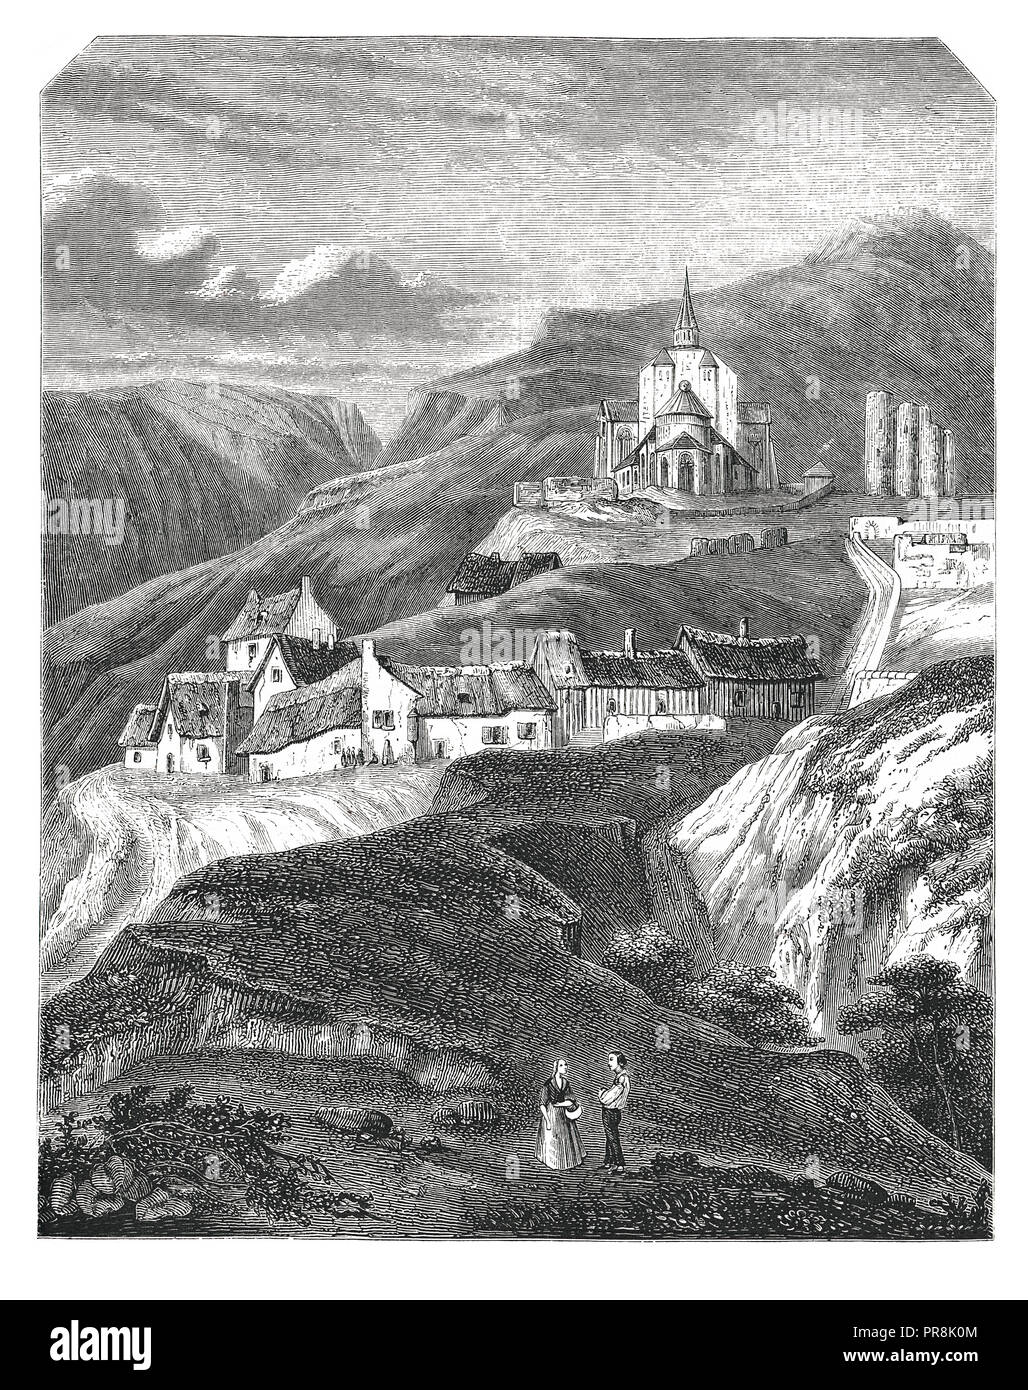 19th century illustration of view of the village of Saint-Nectaire, department of Puy-de-Dome. Original artwork published in Le magasin Pittoresque by Stock Photo